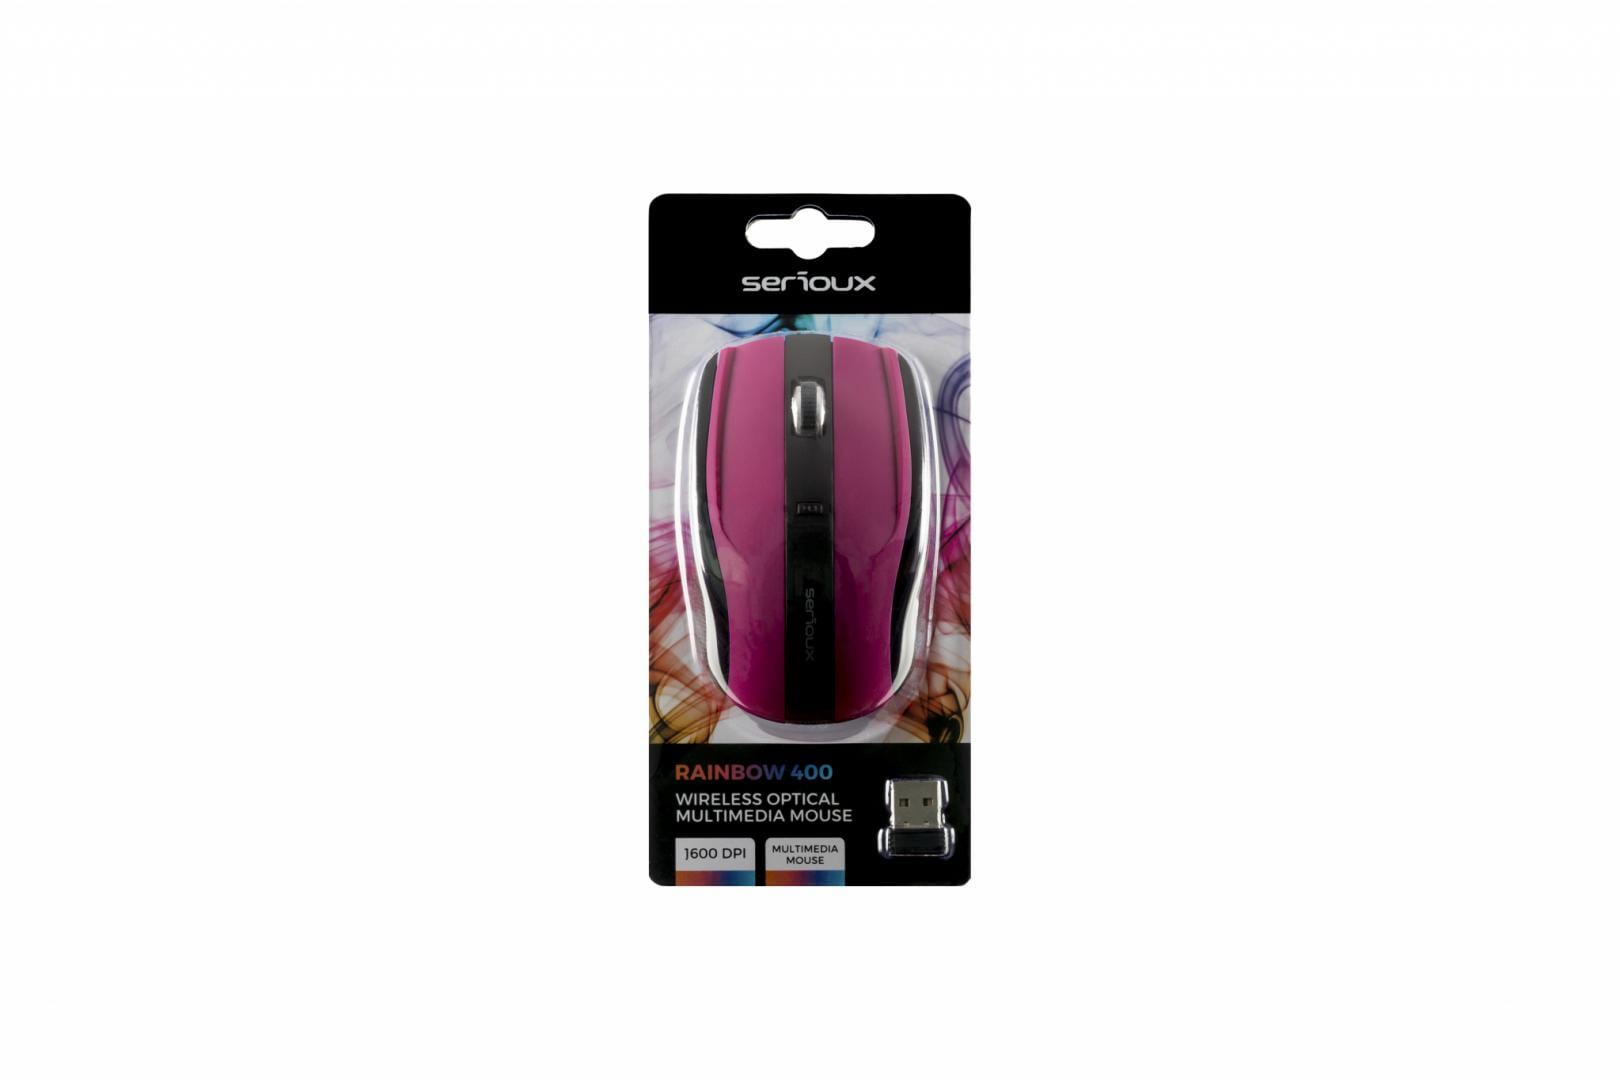 Mouse Wireless Serioux Rainbow 400